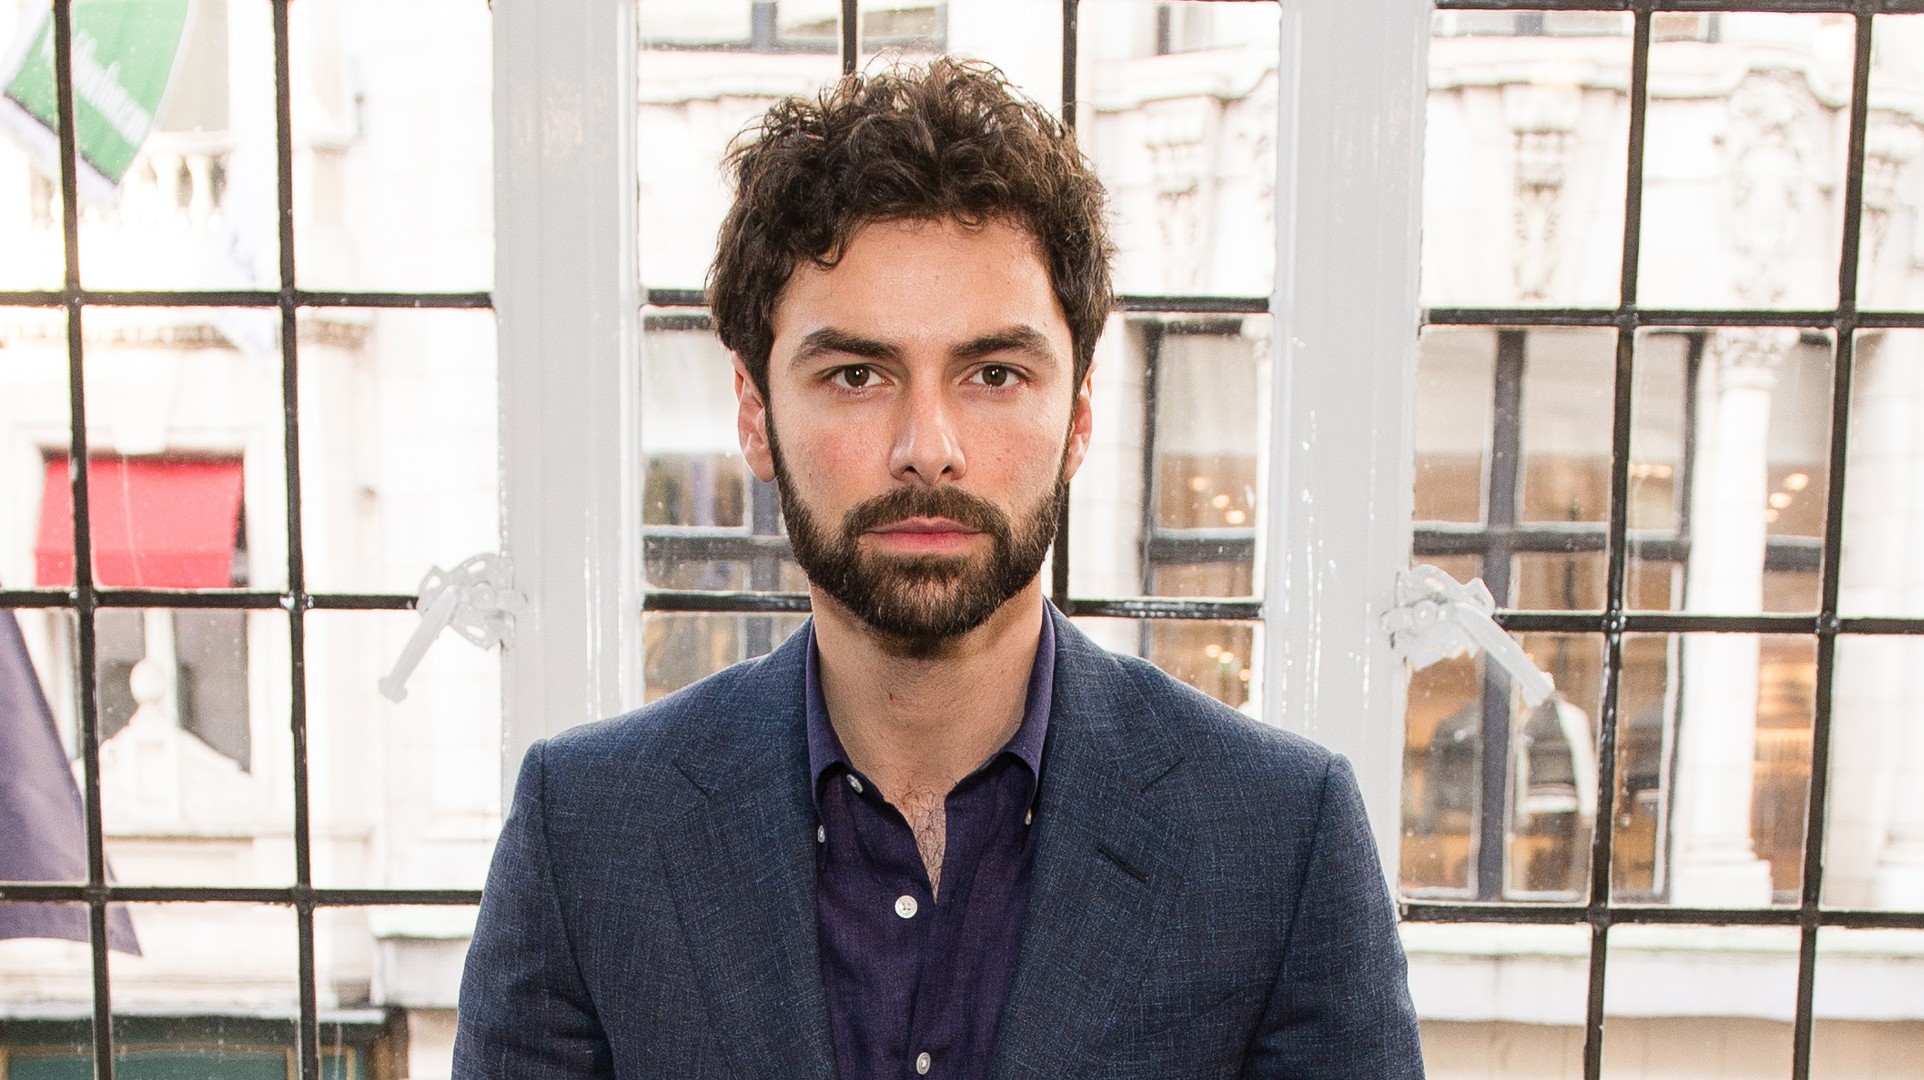 7 Roles That Made Us Appreciate Aidan Turner: From 'Being Human' to 'Poldark'